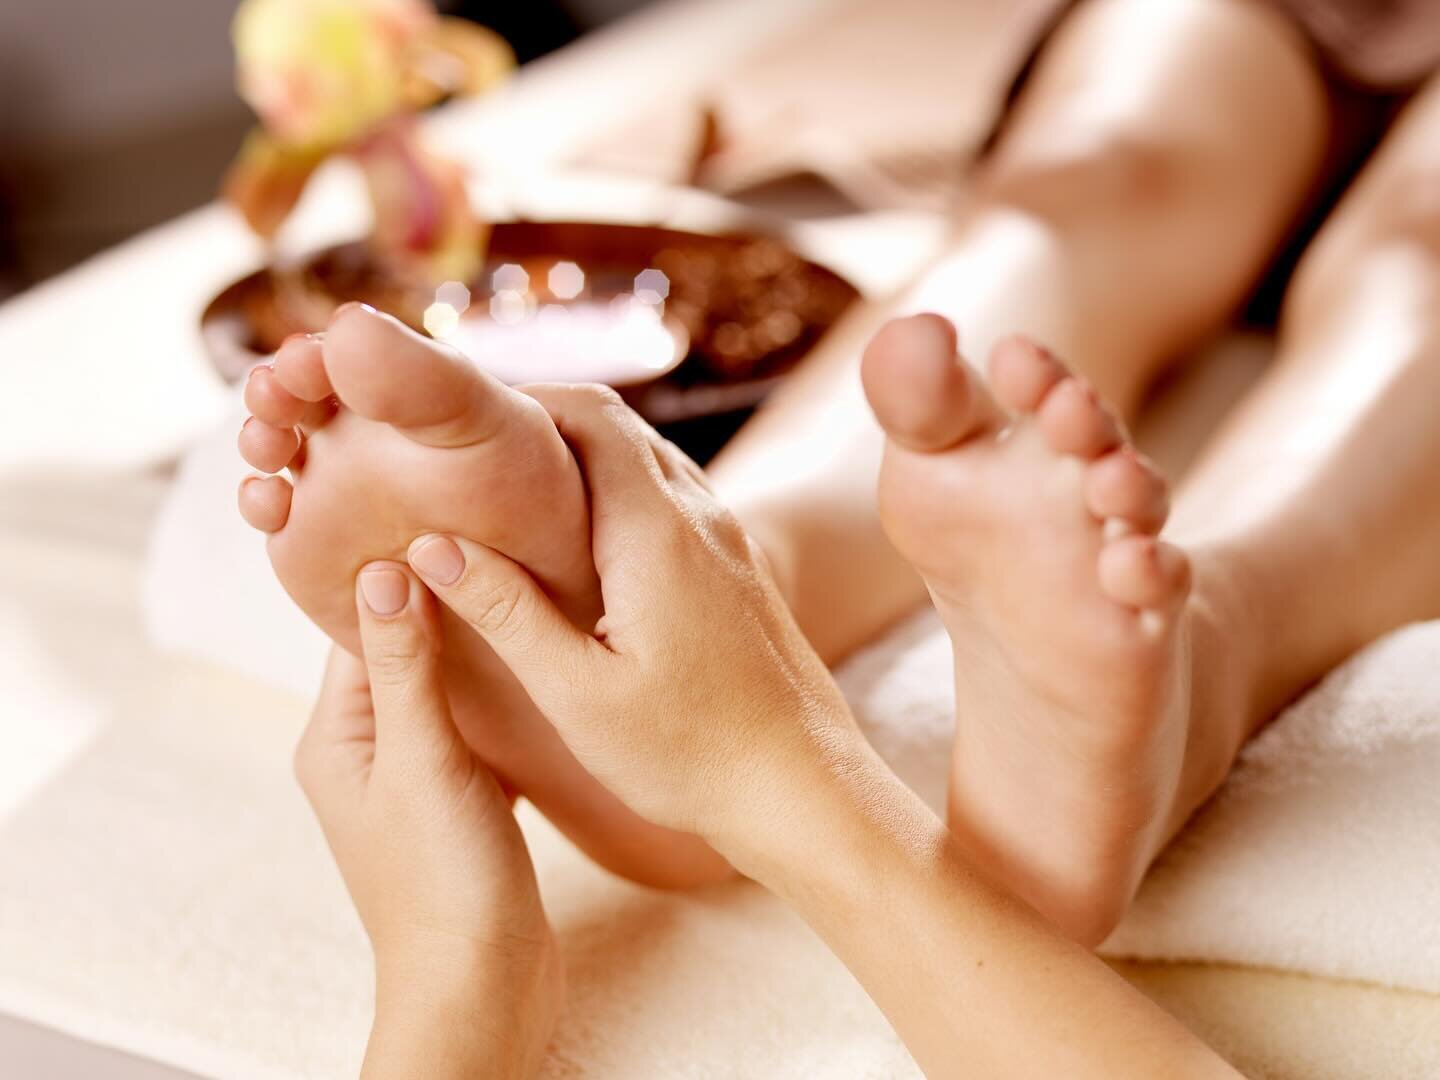 Why reflexology for pregnancy? 👣
The pregnant body goes through a myriad of changes during the 40 weeks or so that it grows and carries a baby🤰!Reflexology can be a wonderful aid during this time as it can be adapted to match where you are at durin